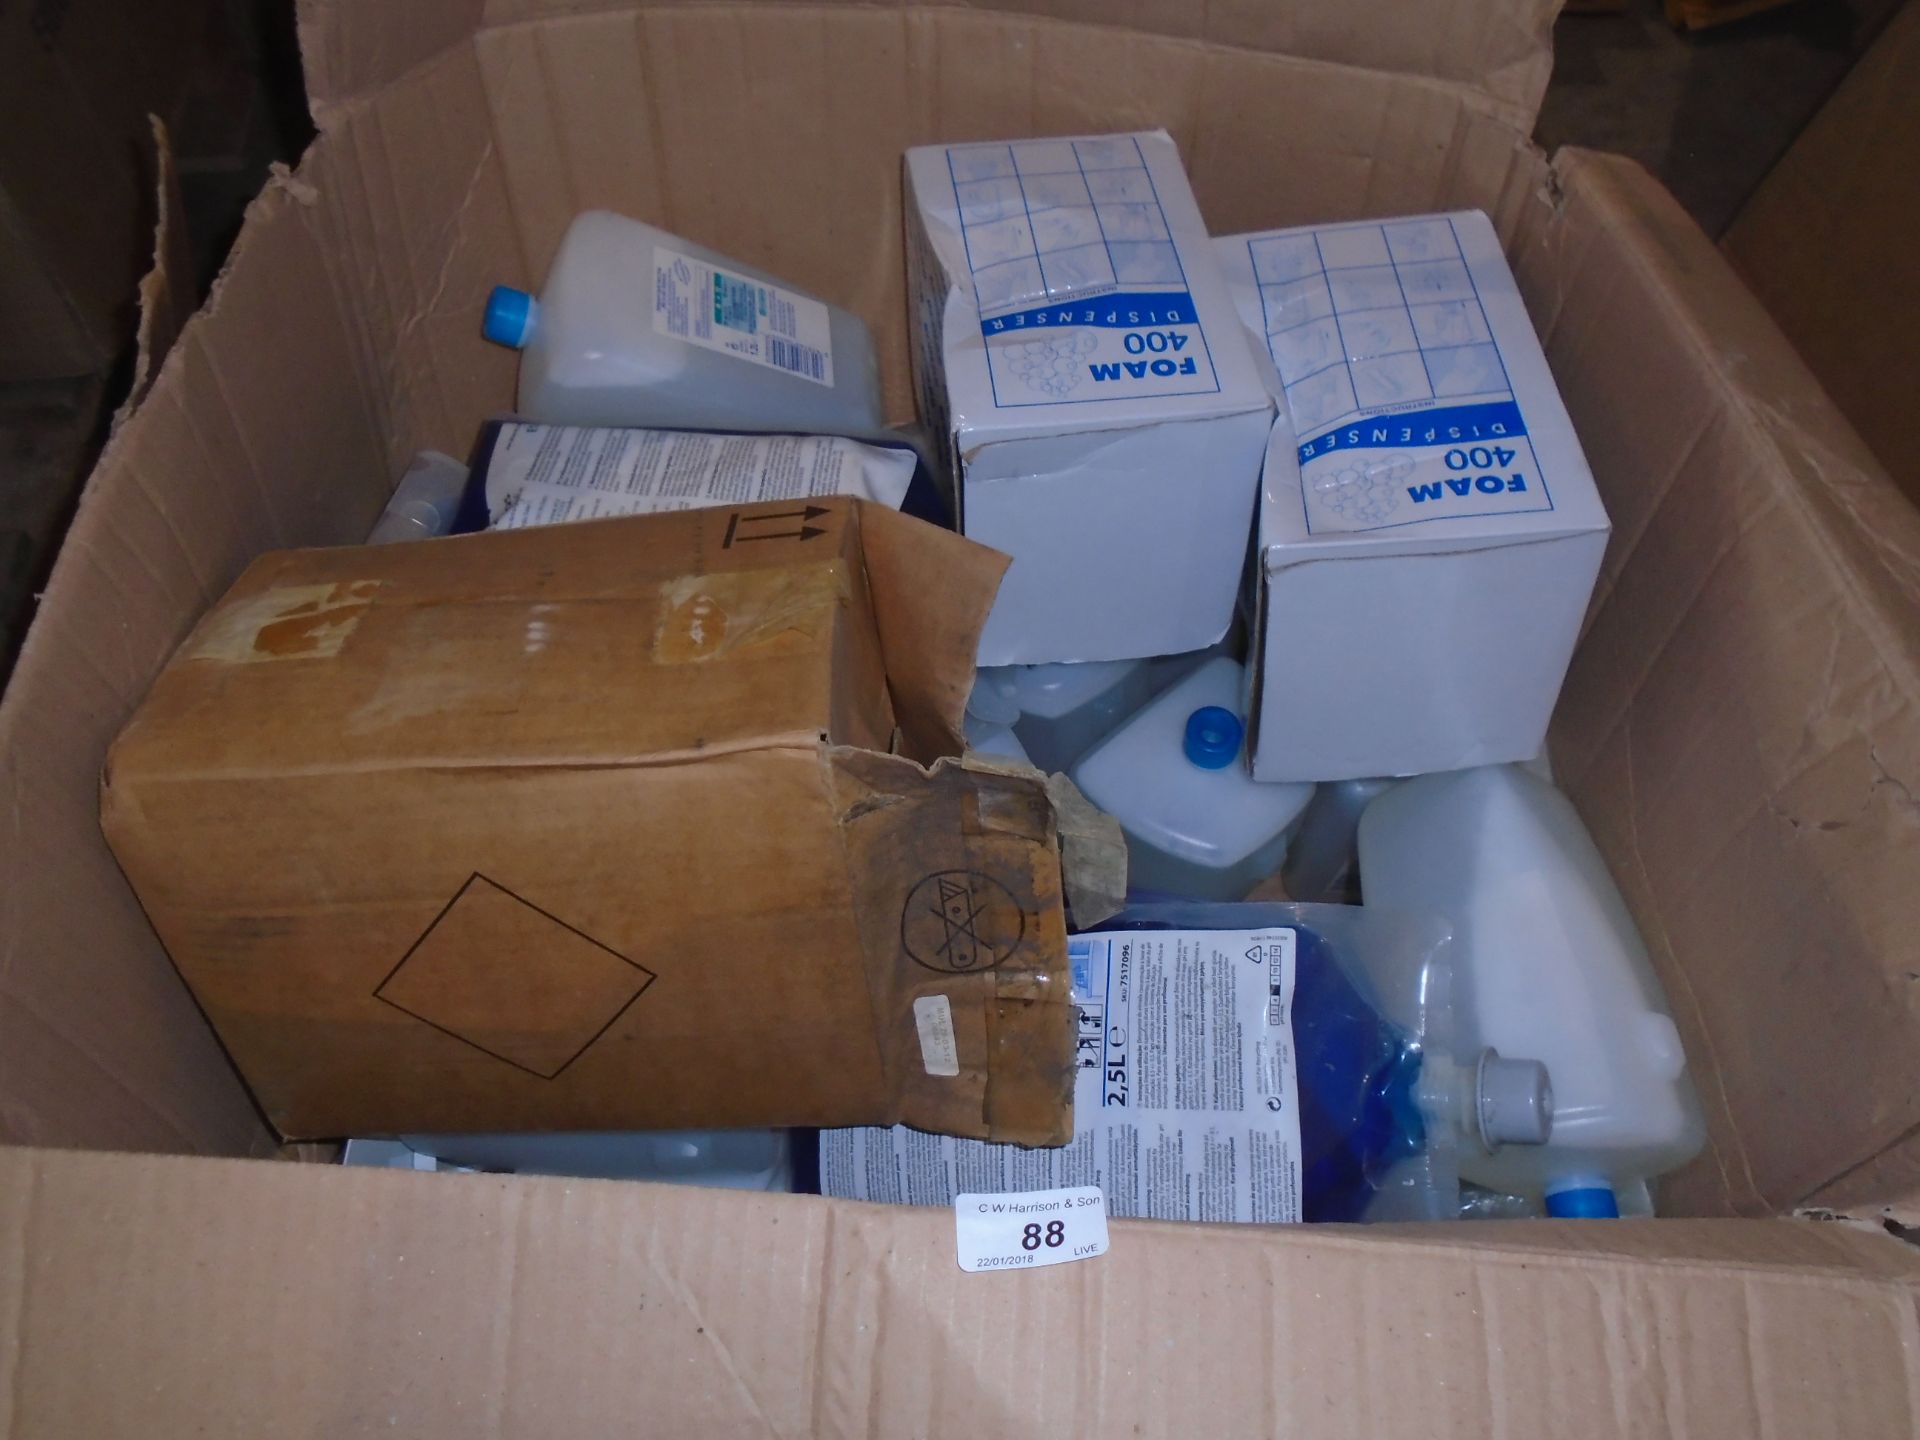 Contents to box - soap dispensers,